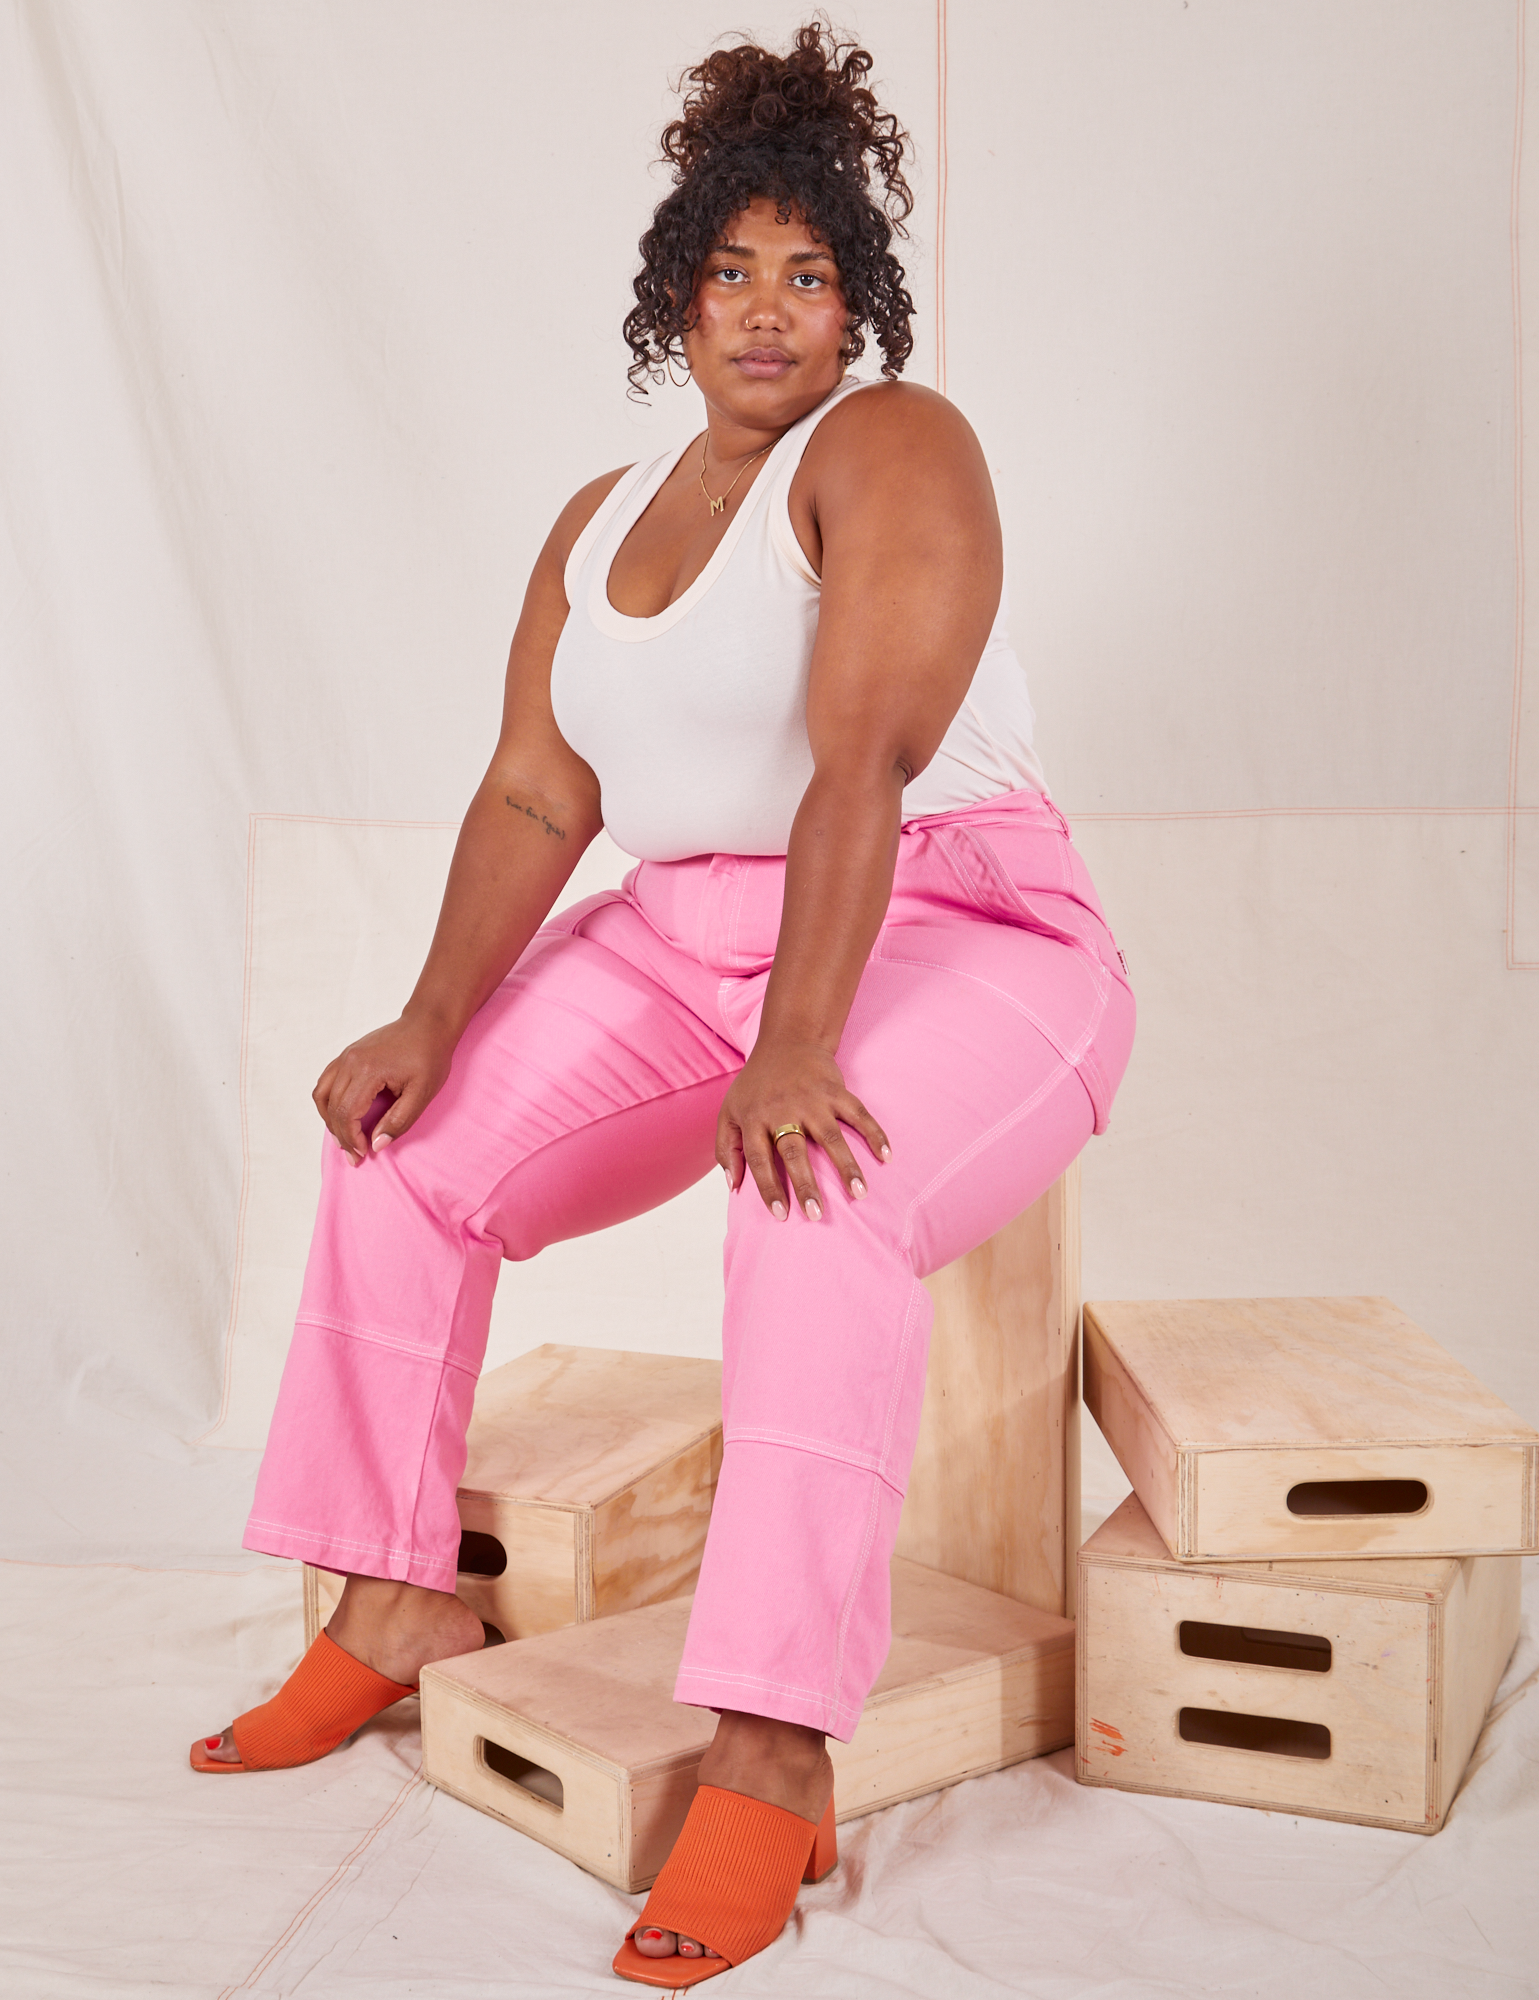 Morgan is 5'5" and wearing 1XL Carpenter Jeans in Bubblegum Pink paired with Tank Top in vintage tee off-white